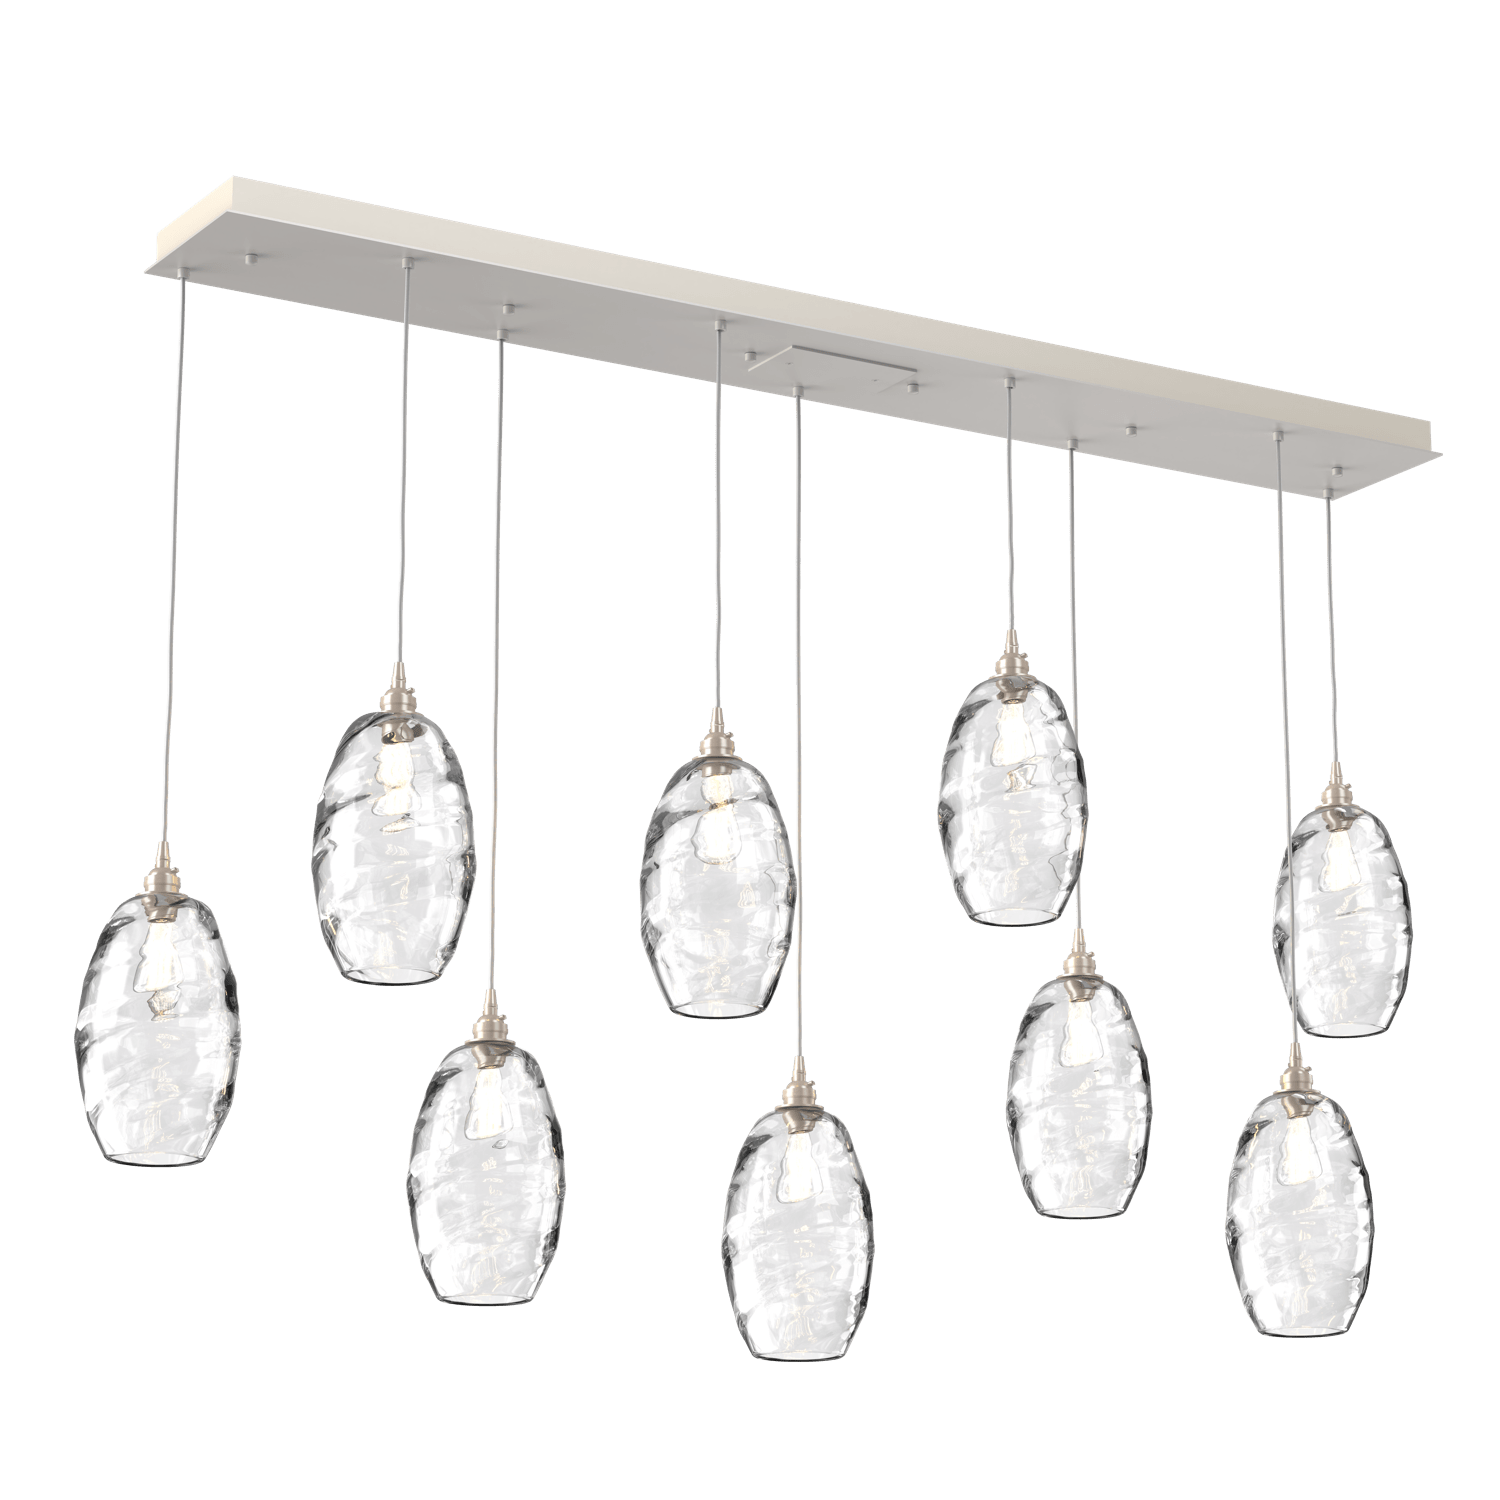 PLB0035-09-BS-OC-Hammerton-Studio-Optic-Blown-Glass-Elisse-9-light-linear-pendant-chandelier-with-metallic-beige-silver-finish-and-optic-clear-blown-glass-shades-and-incandescent-lamping